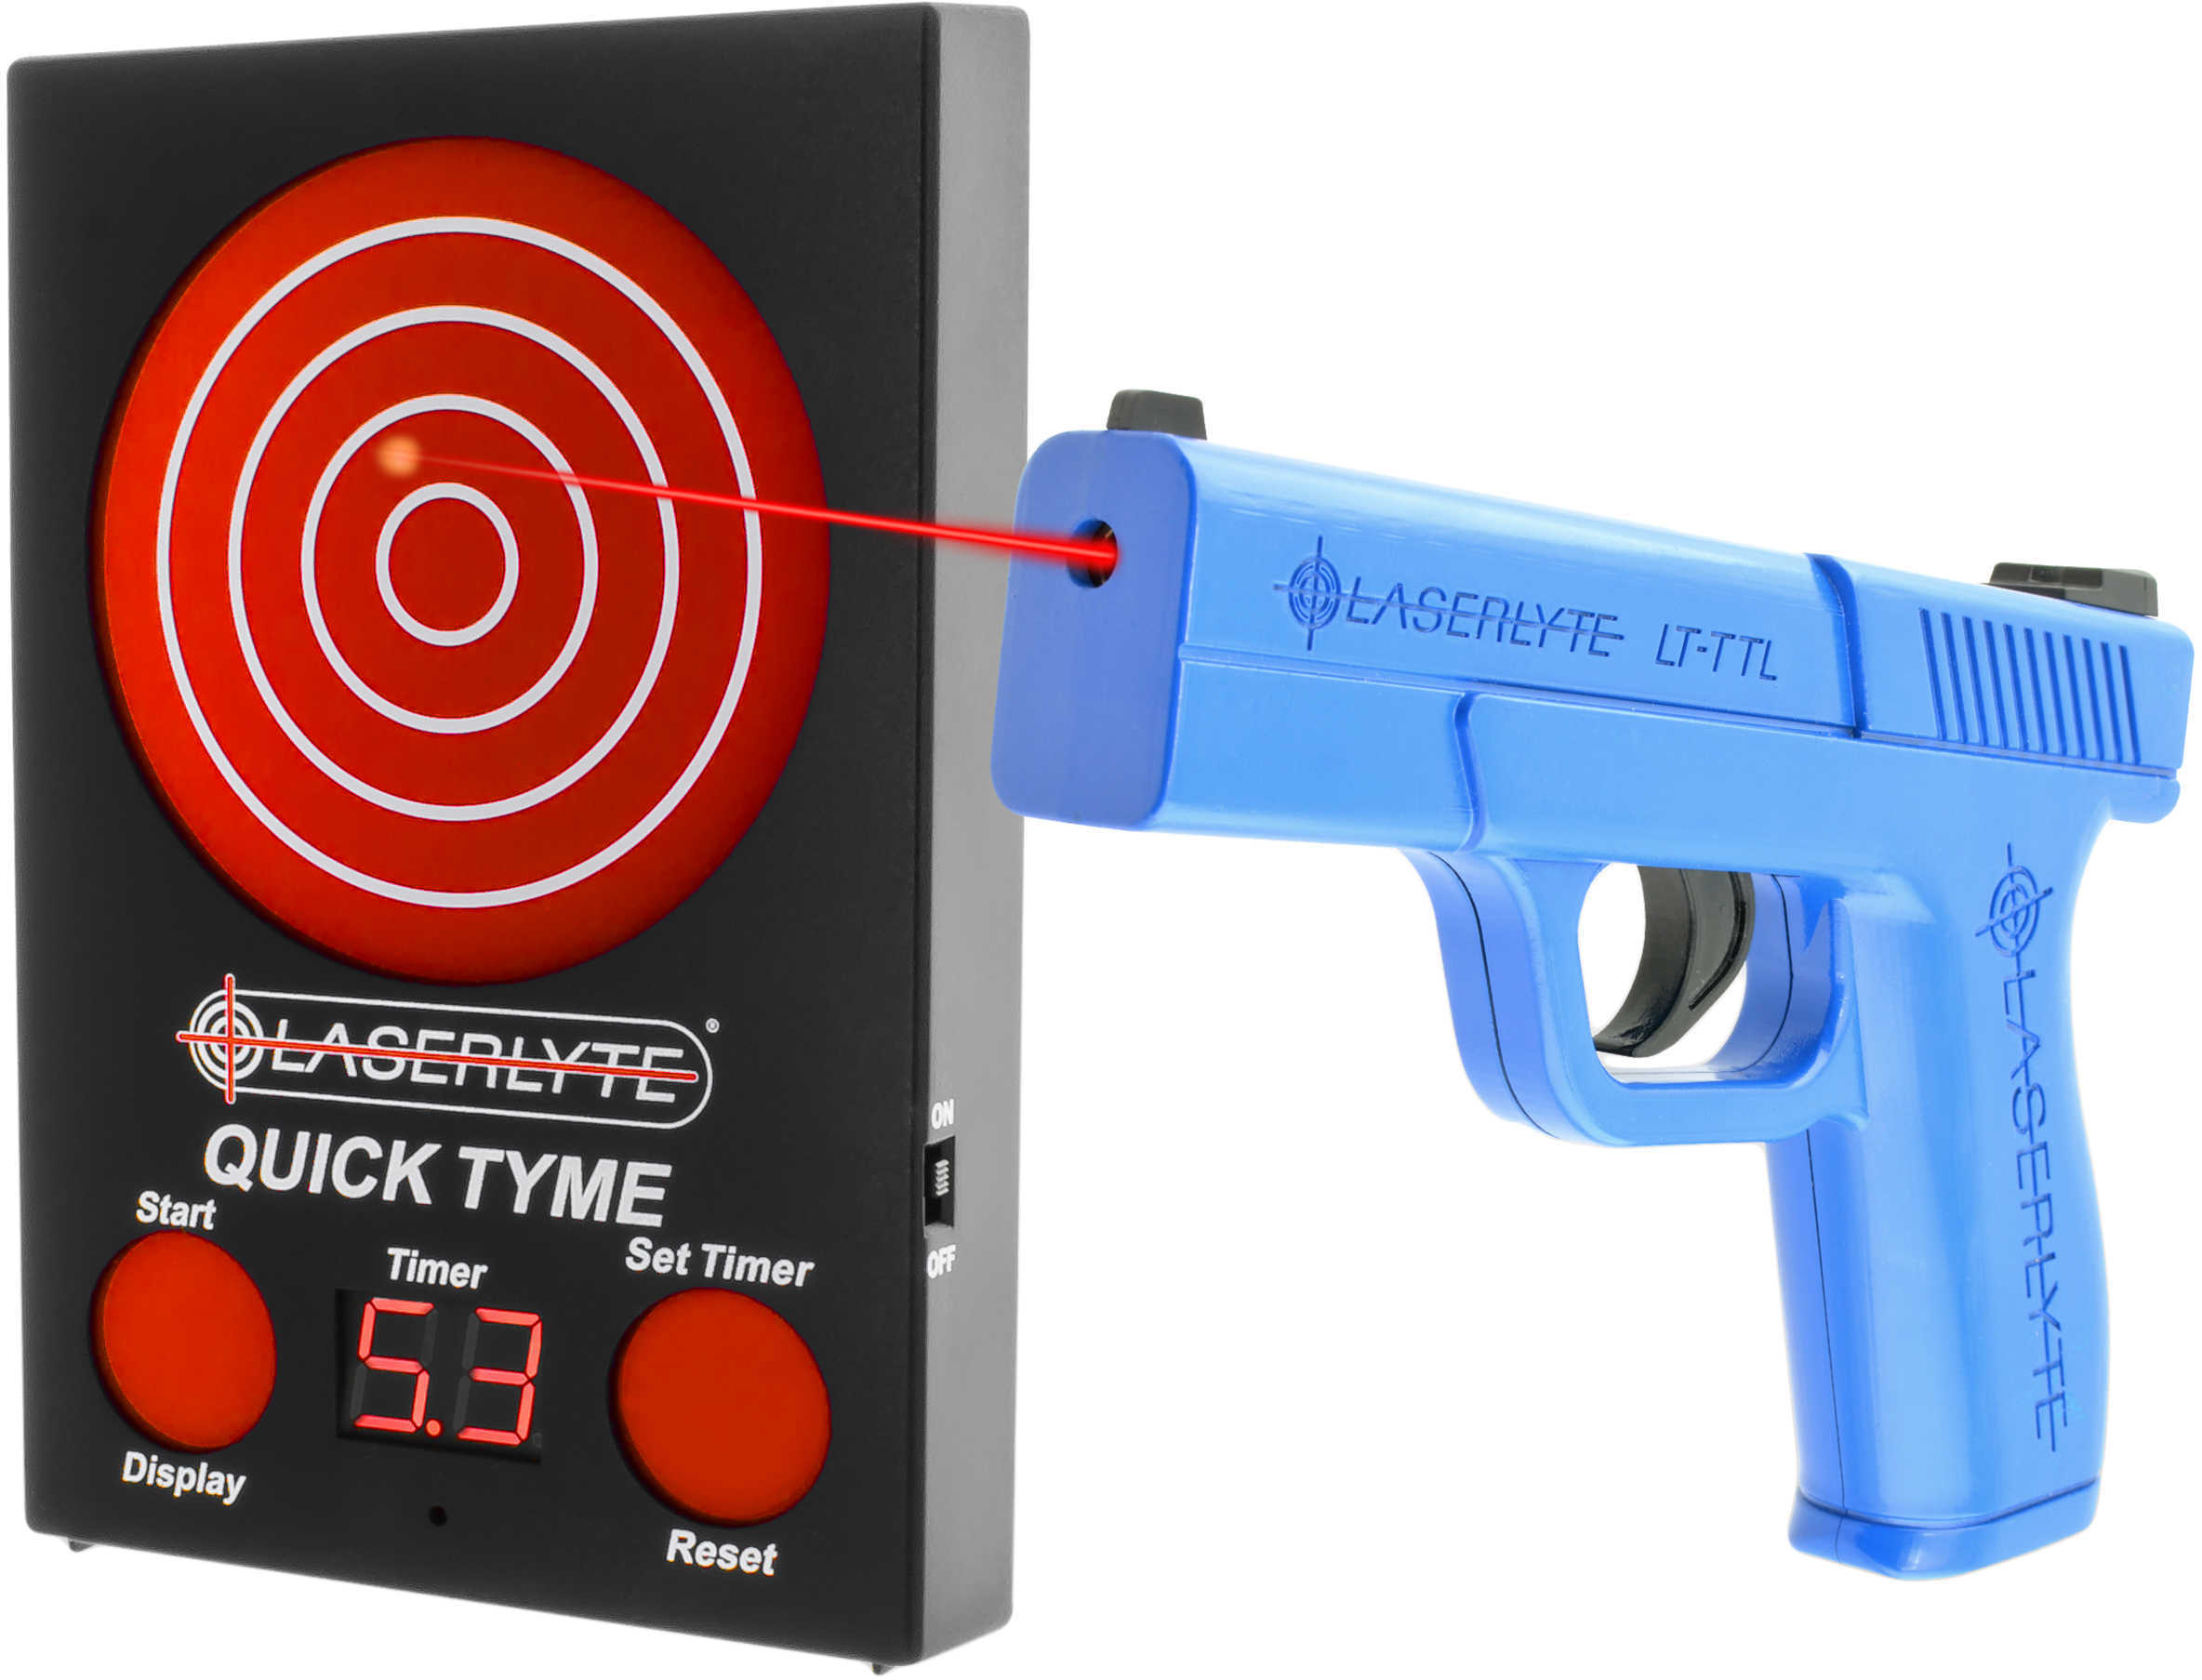 Laserlyte Training Kit Includes 1 Quick Tyme Target and Pistol Full Size Batteries Included TLB-LQD